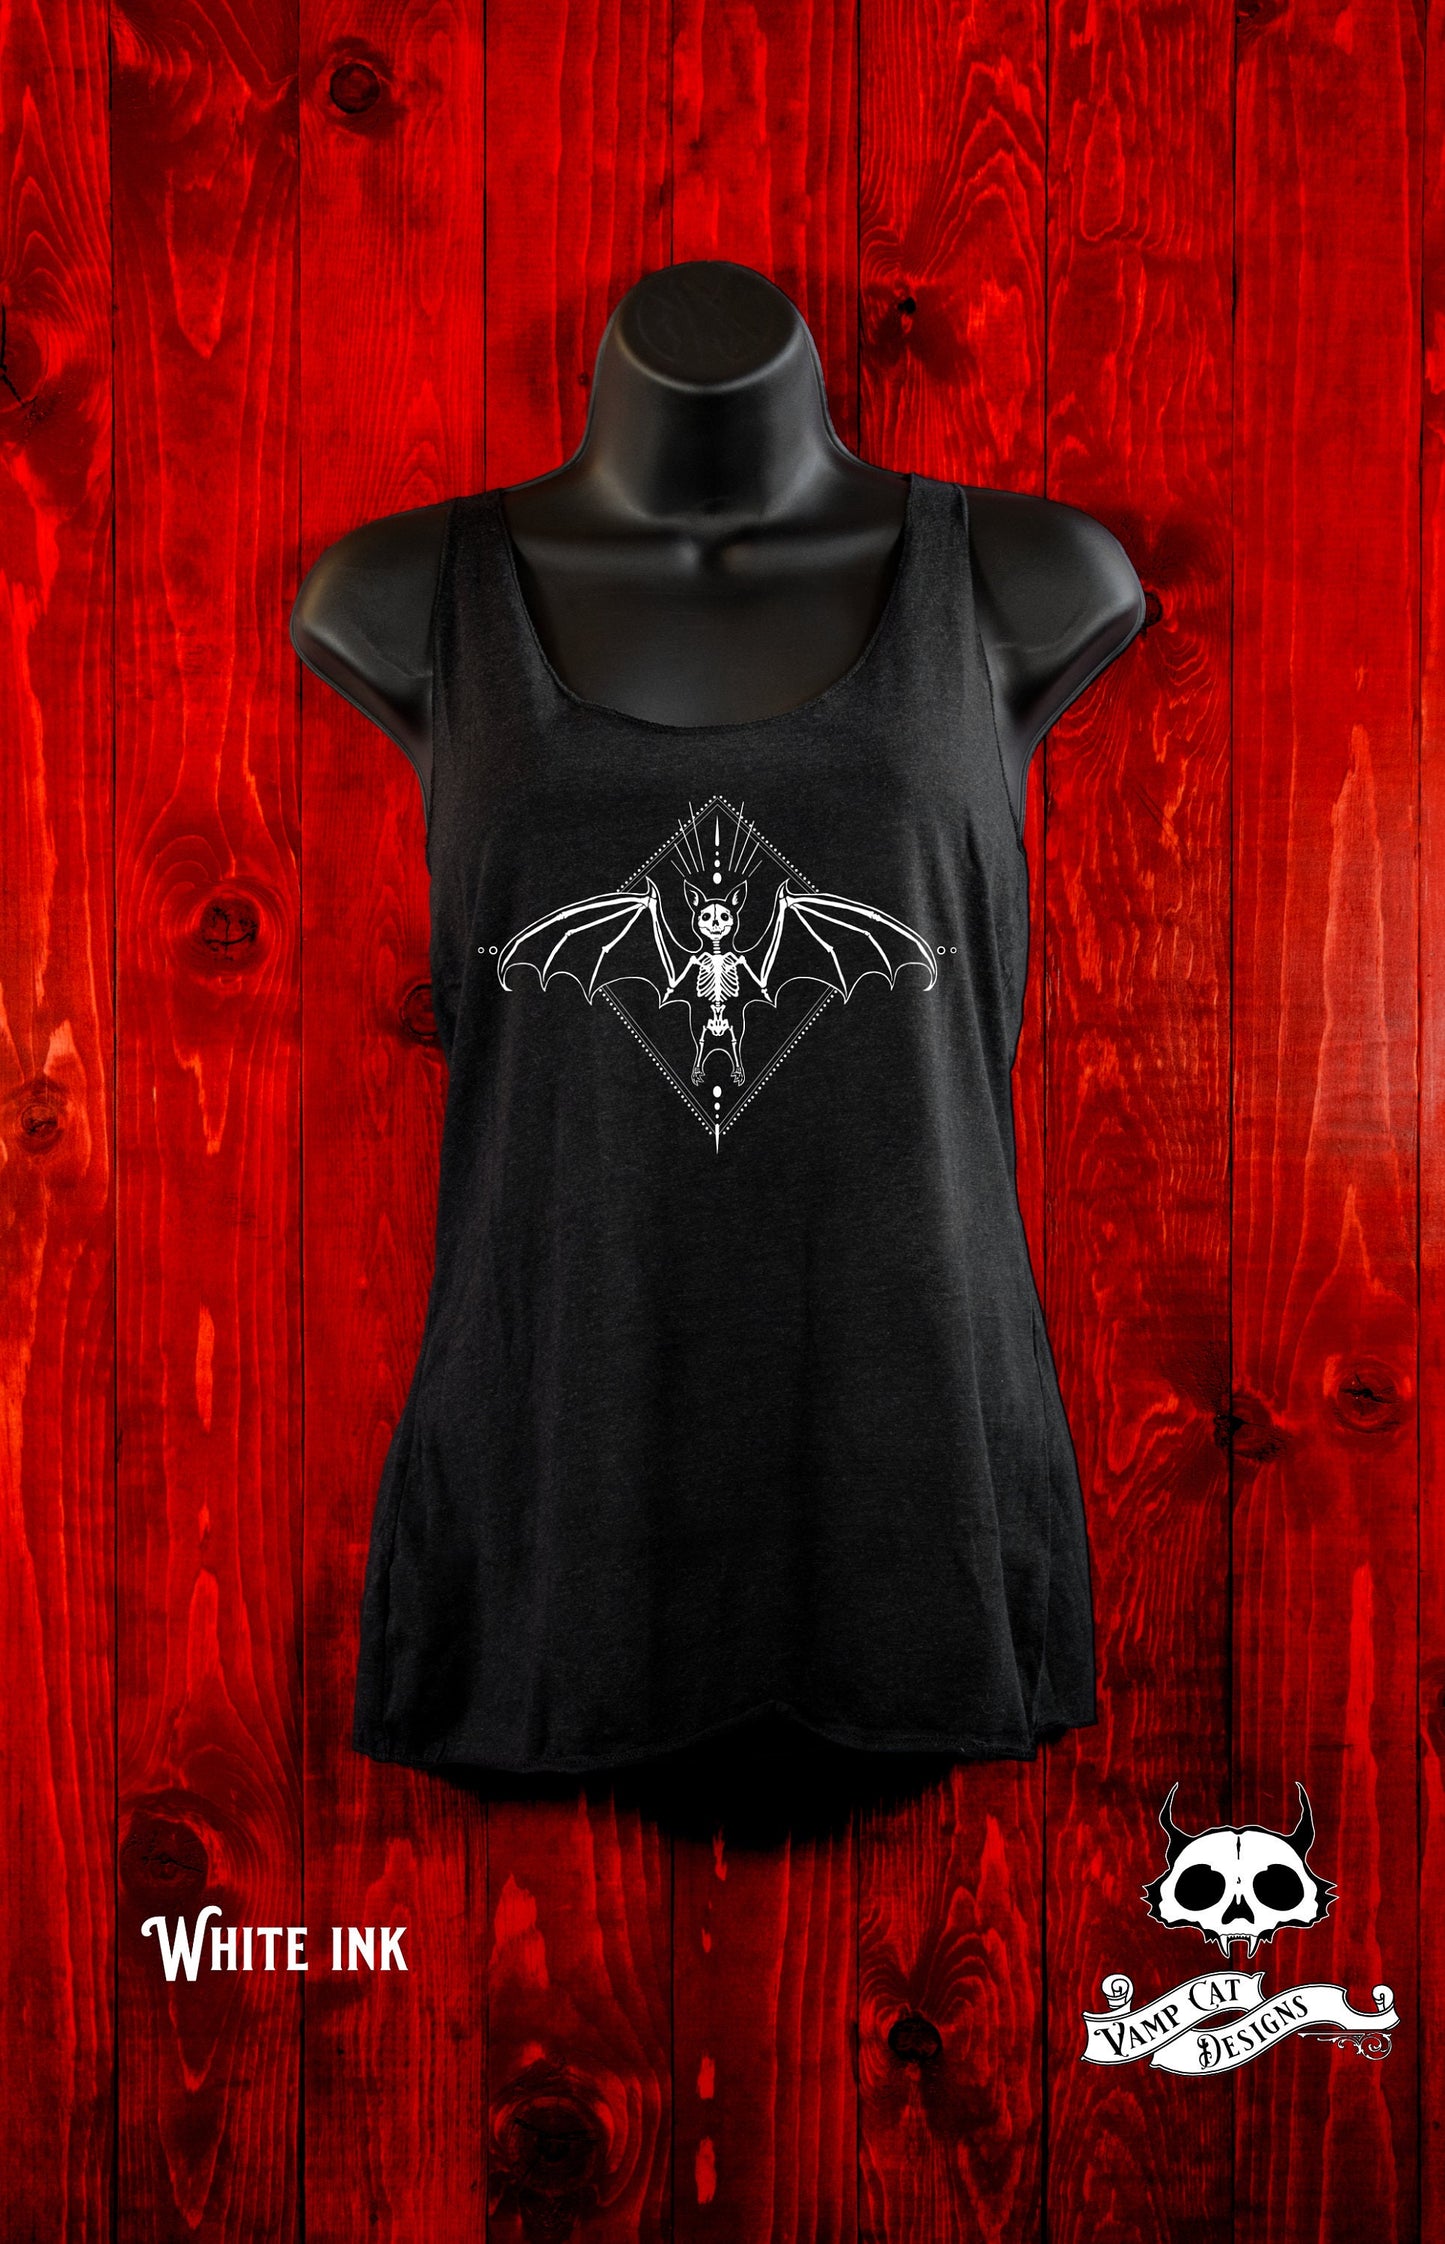 Skeleton Bat-Tank Top-Winged Creature Illustration-Halloween Tee-Witchy-Dark Apparel-Occult Tops-Women's Top-Gothic Top-Bats And Bones